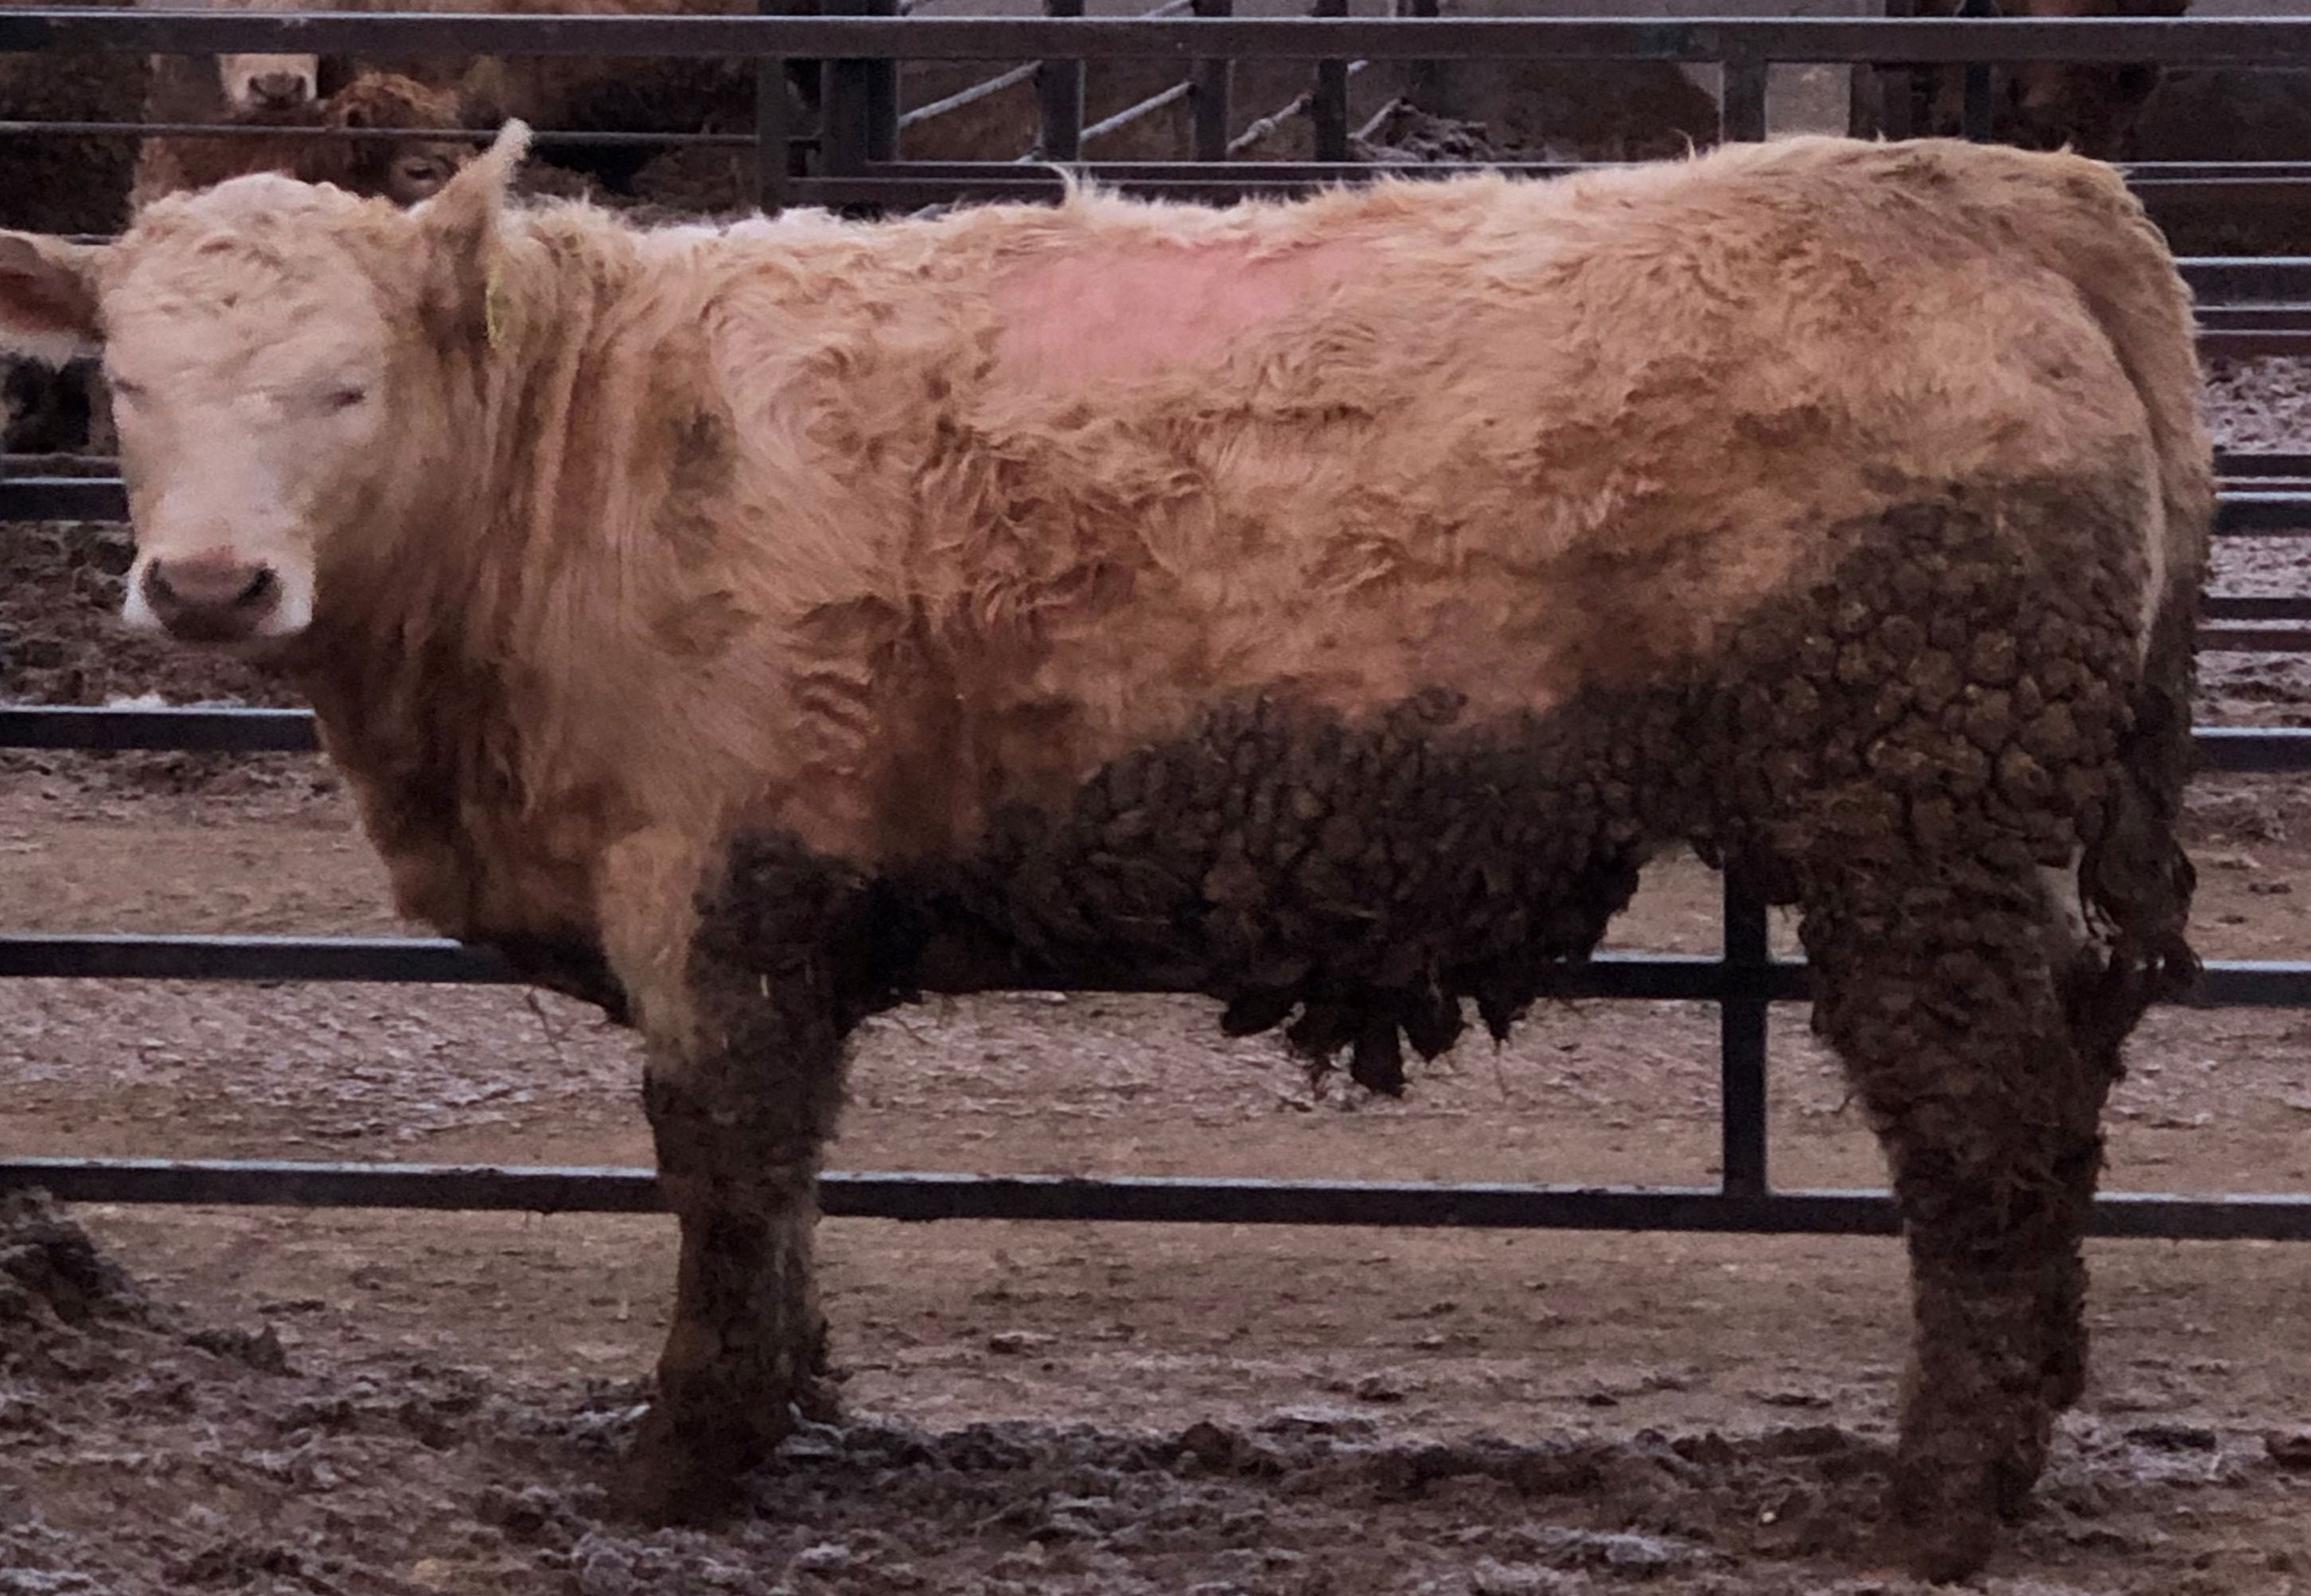 A steer standing in a feedlot. Its middle back has a visible bald spot due to lice.